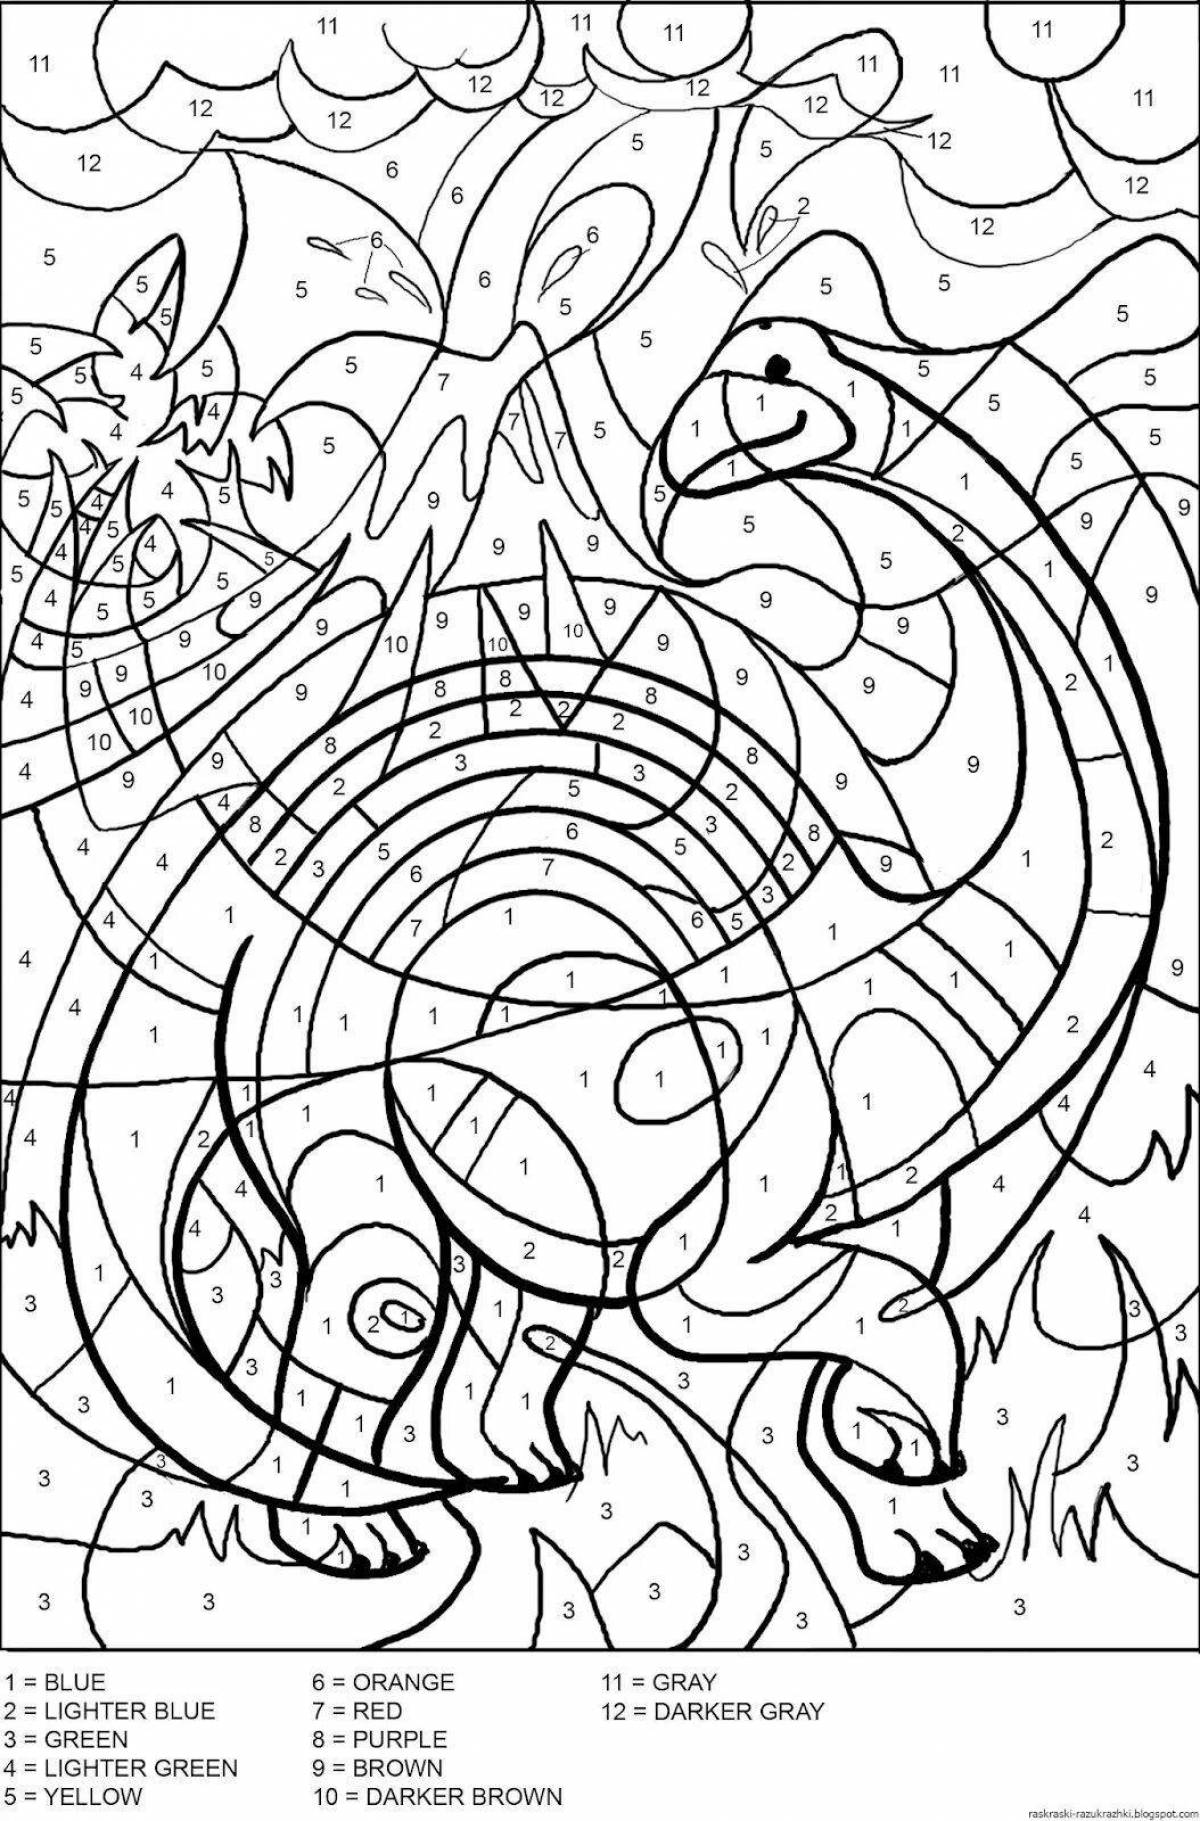 Awesome dinosaur coloring pages by numbers